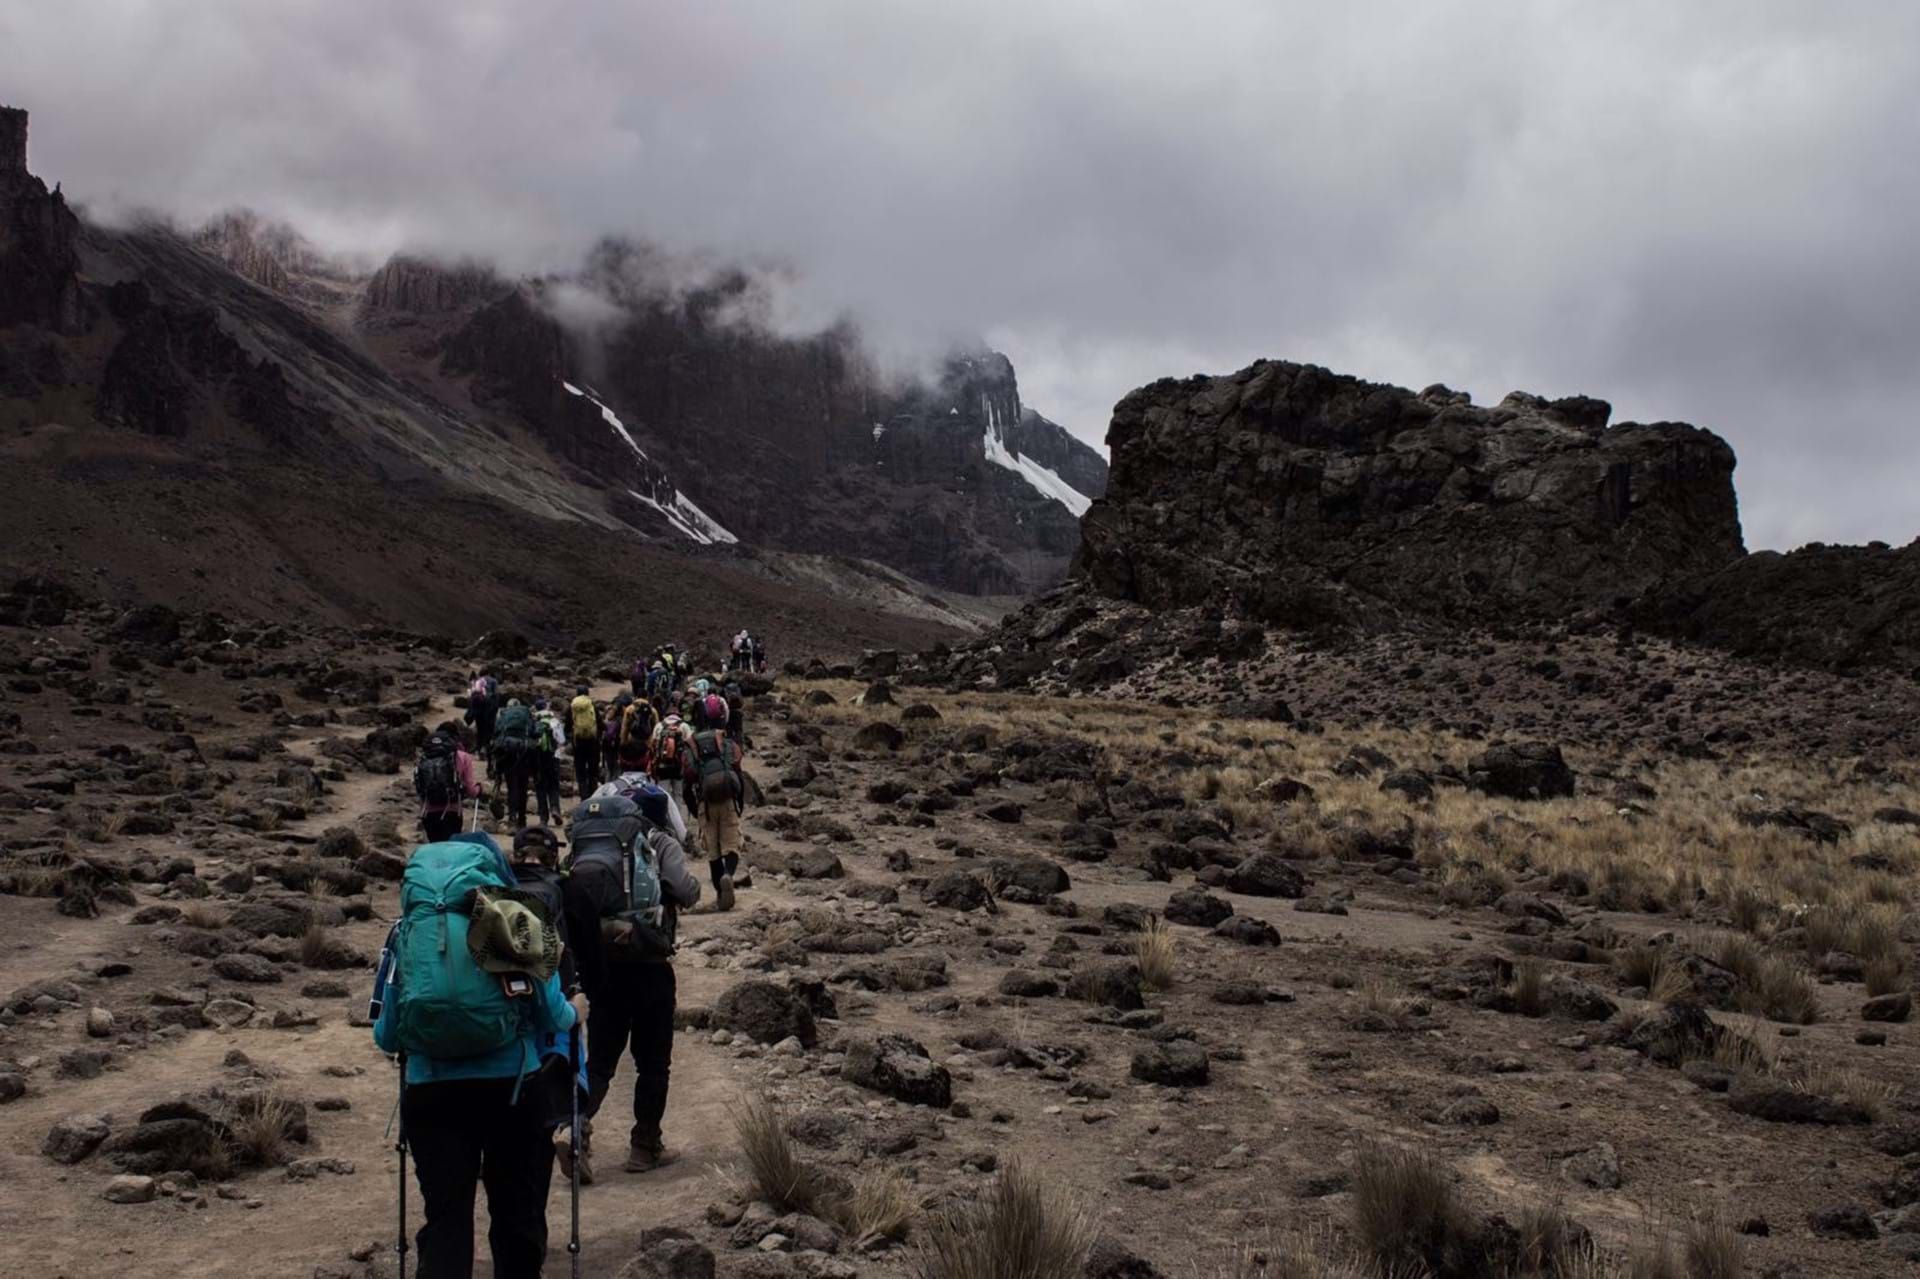 Why did you want to trek Kilimanjaro?